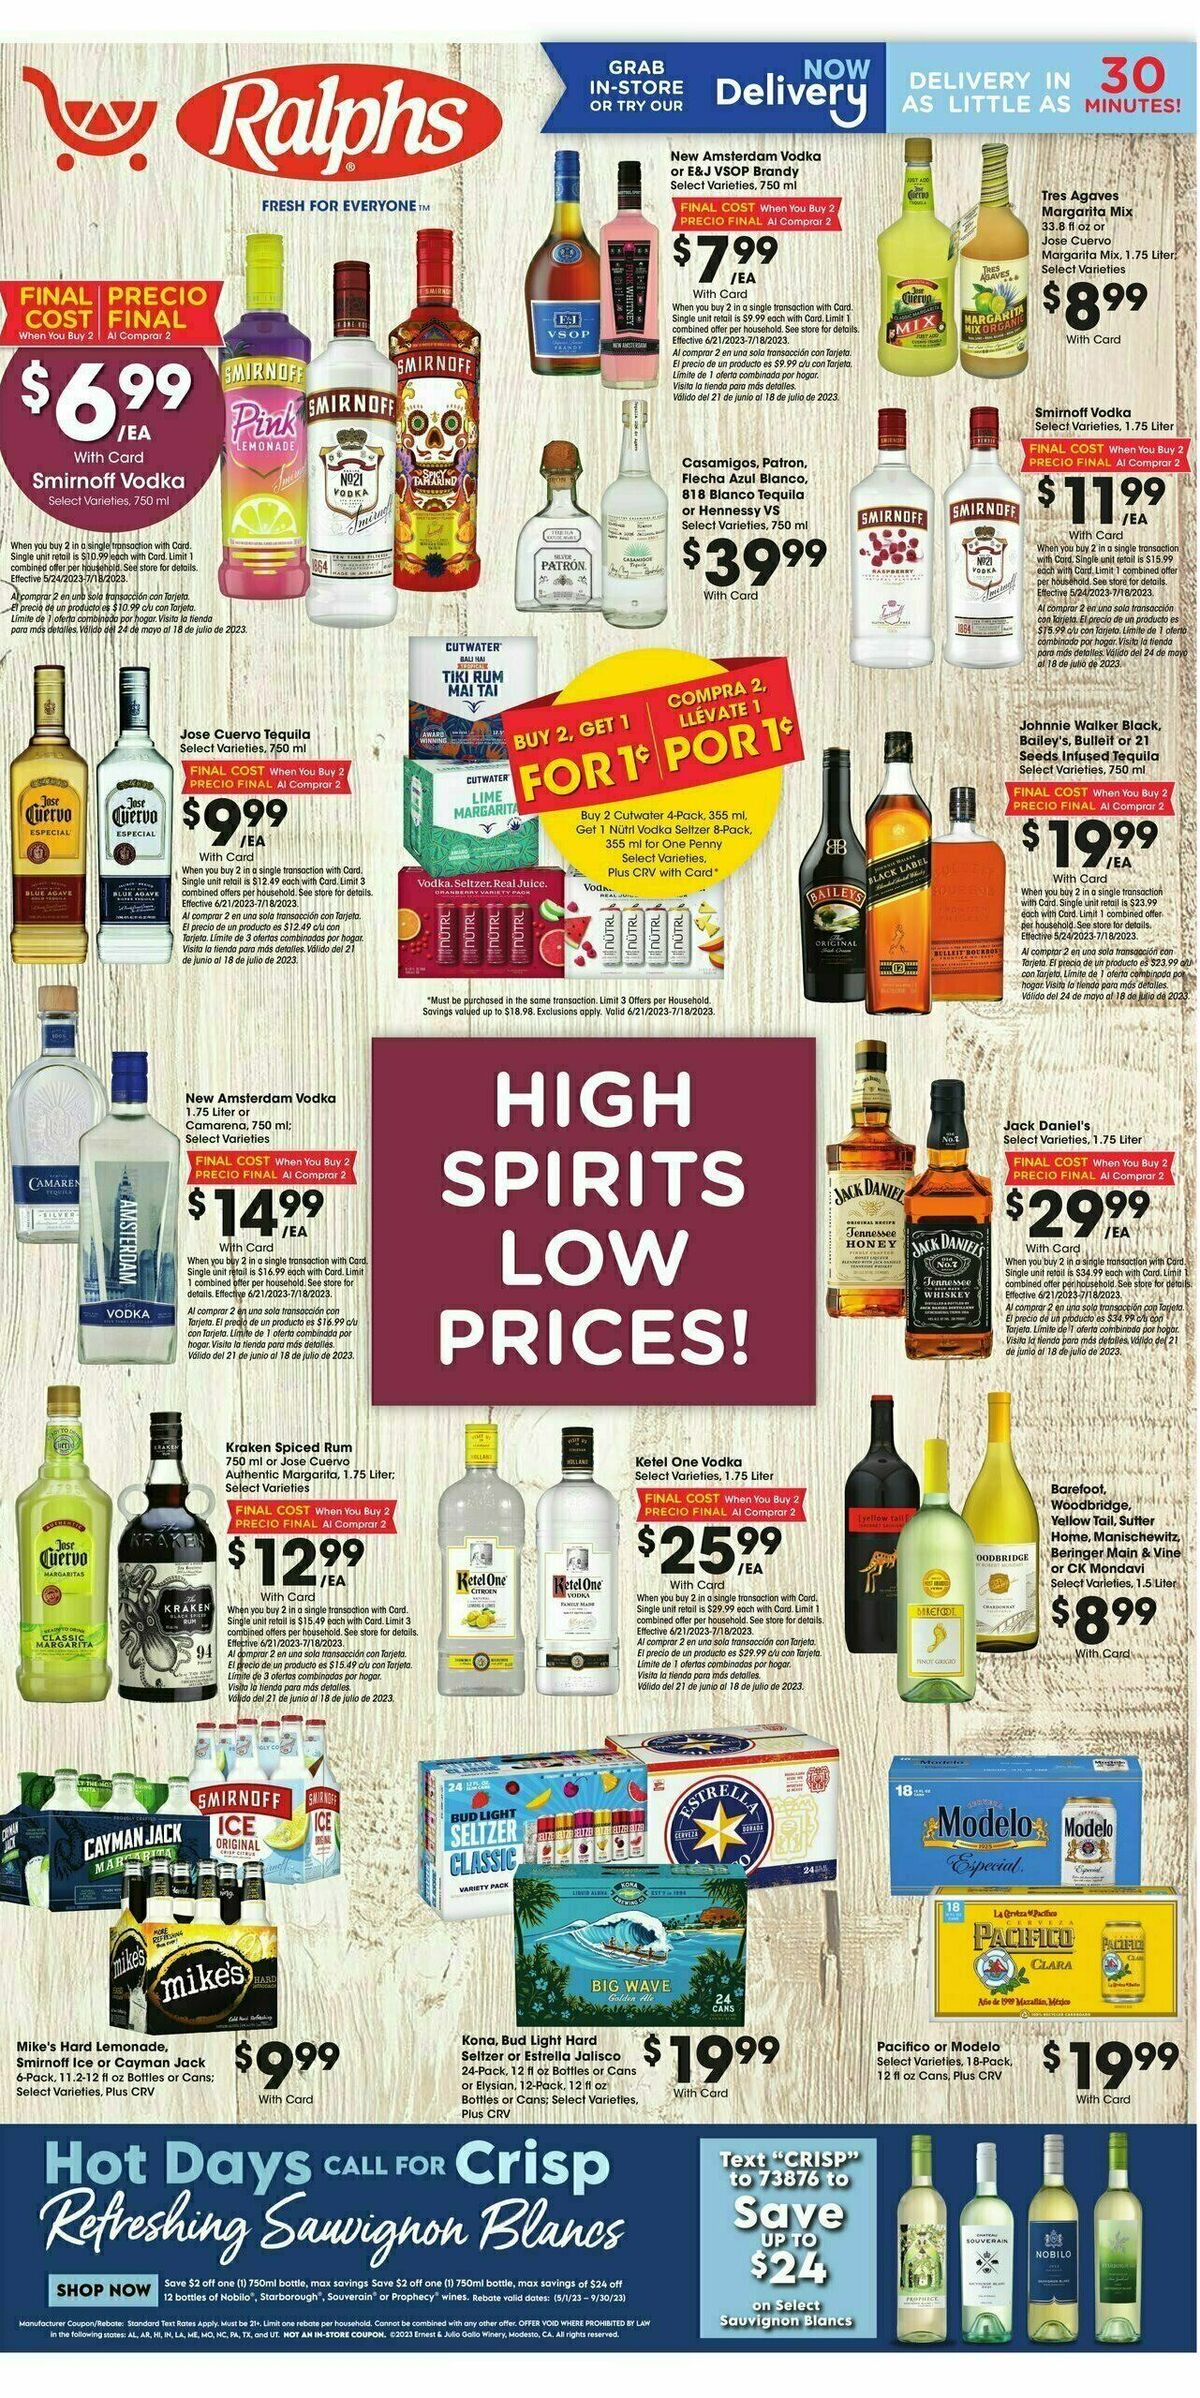 Ralphs High Spirits Low Prices Weekly Ad from June 21